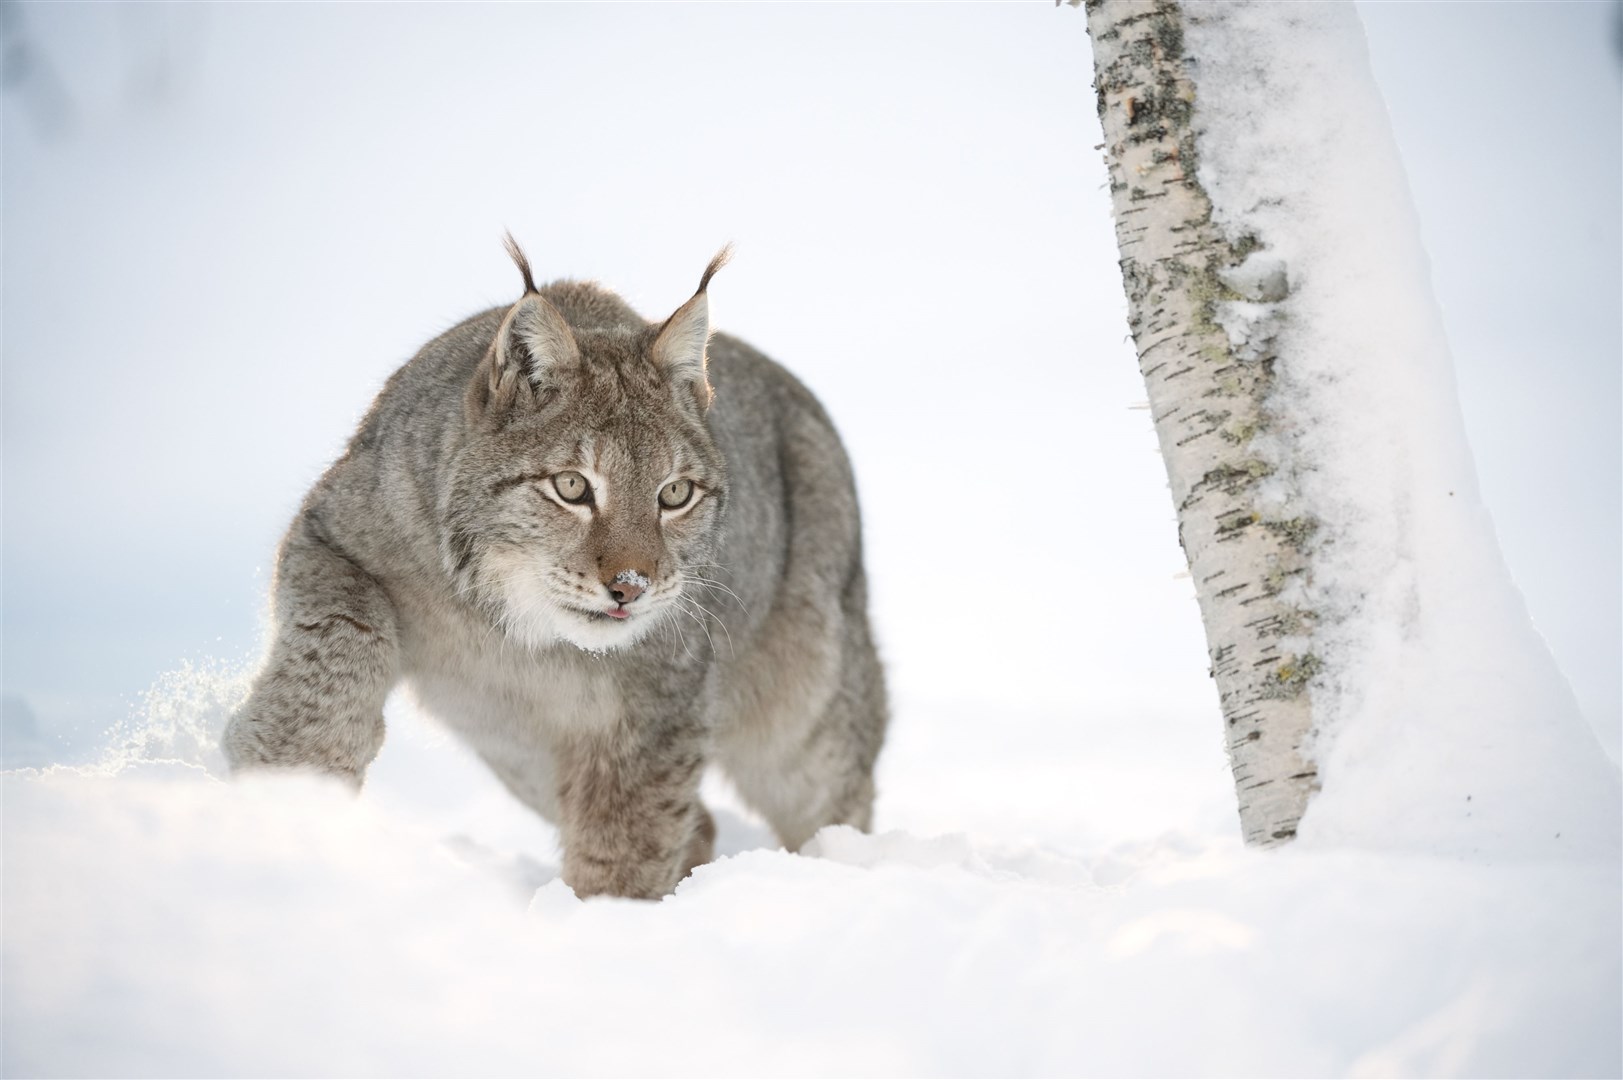 Lynx are a keystone species which can influence how other species interact. Picture: © scotlandbigpicture.com